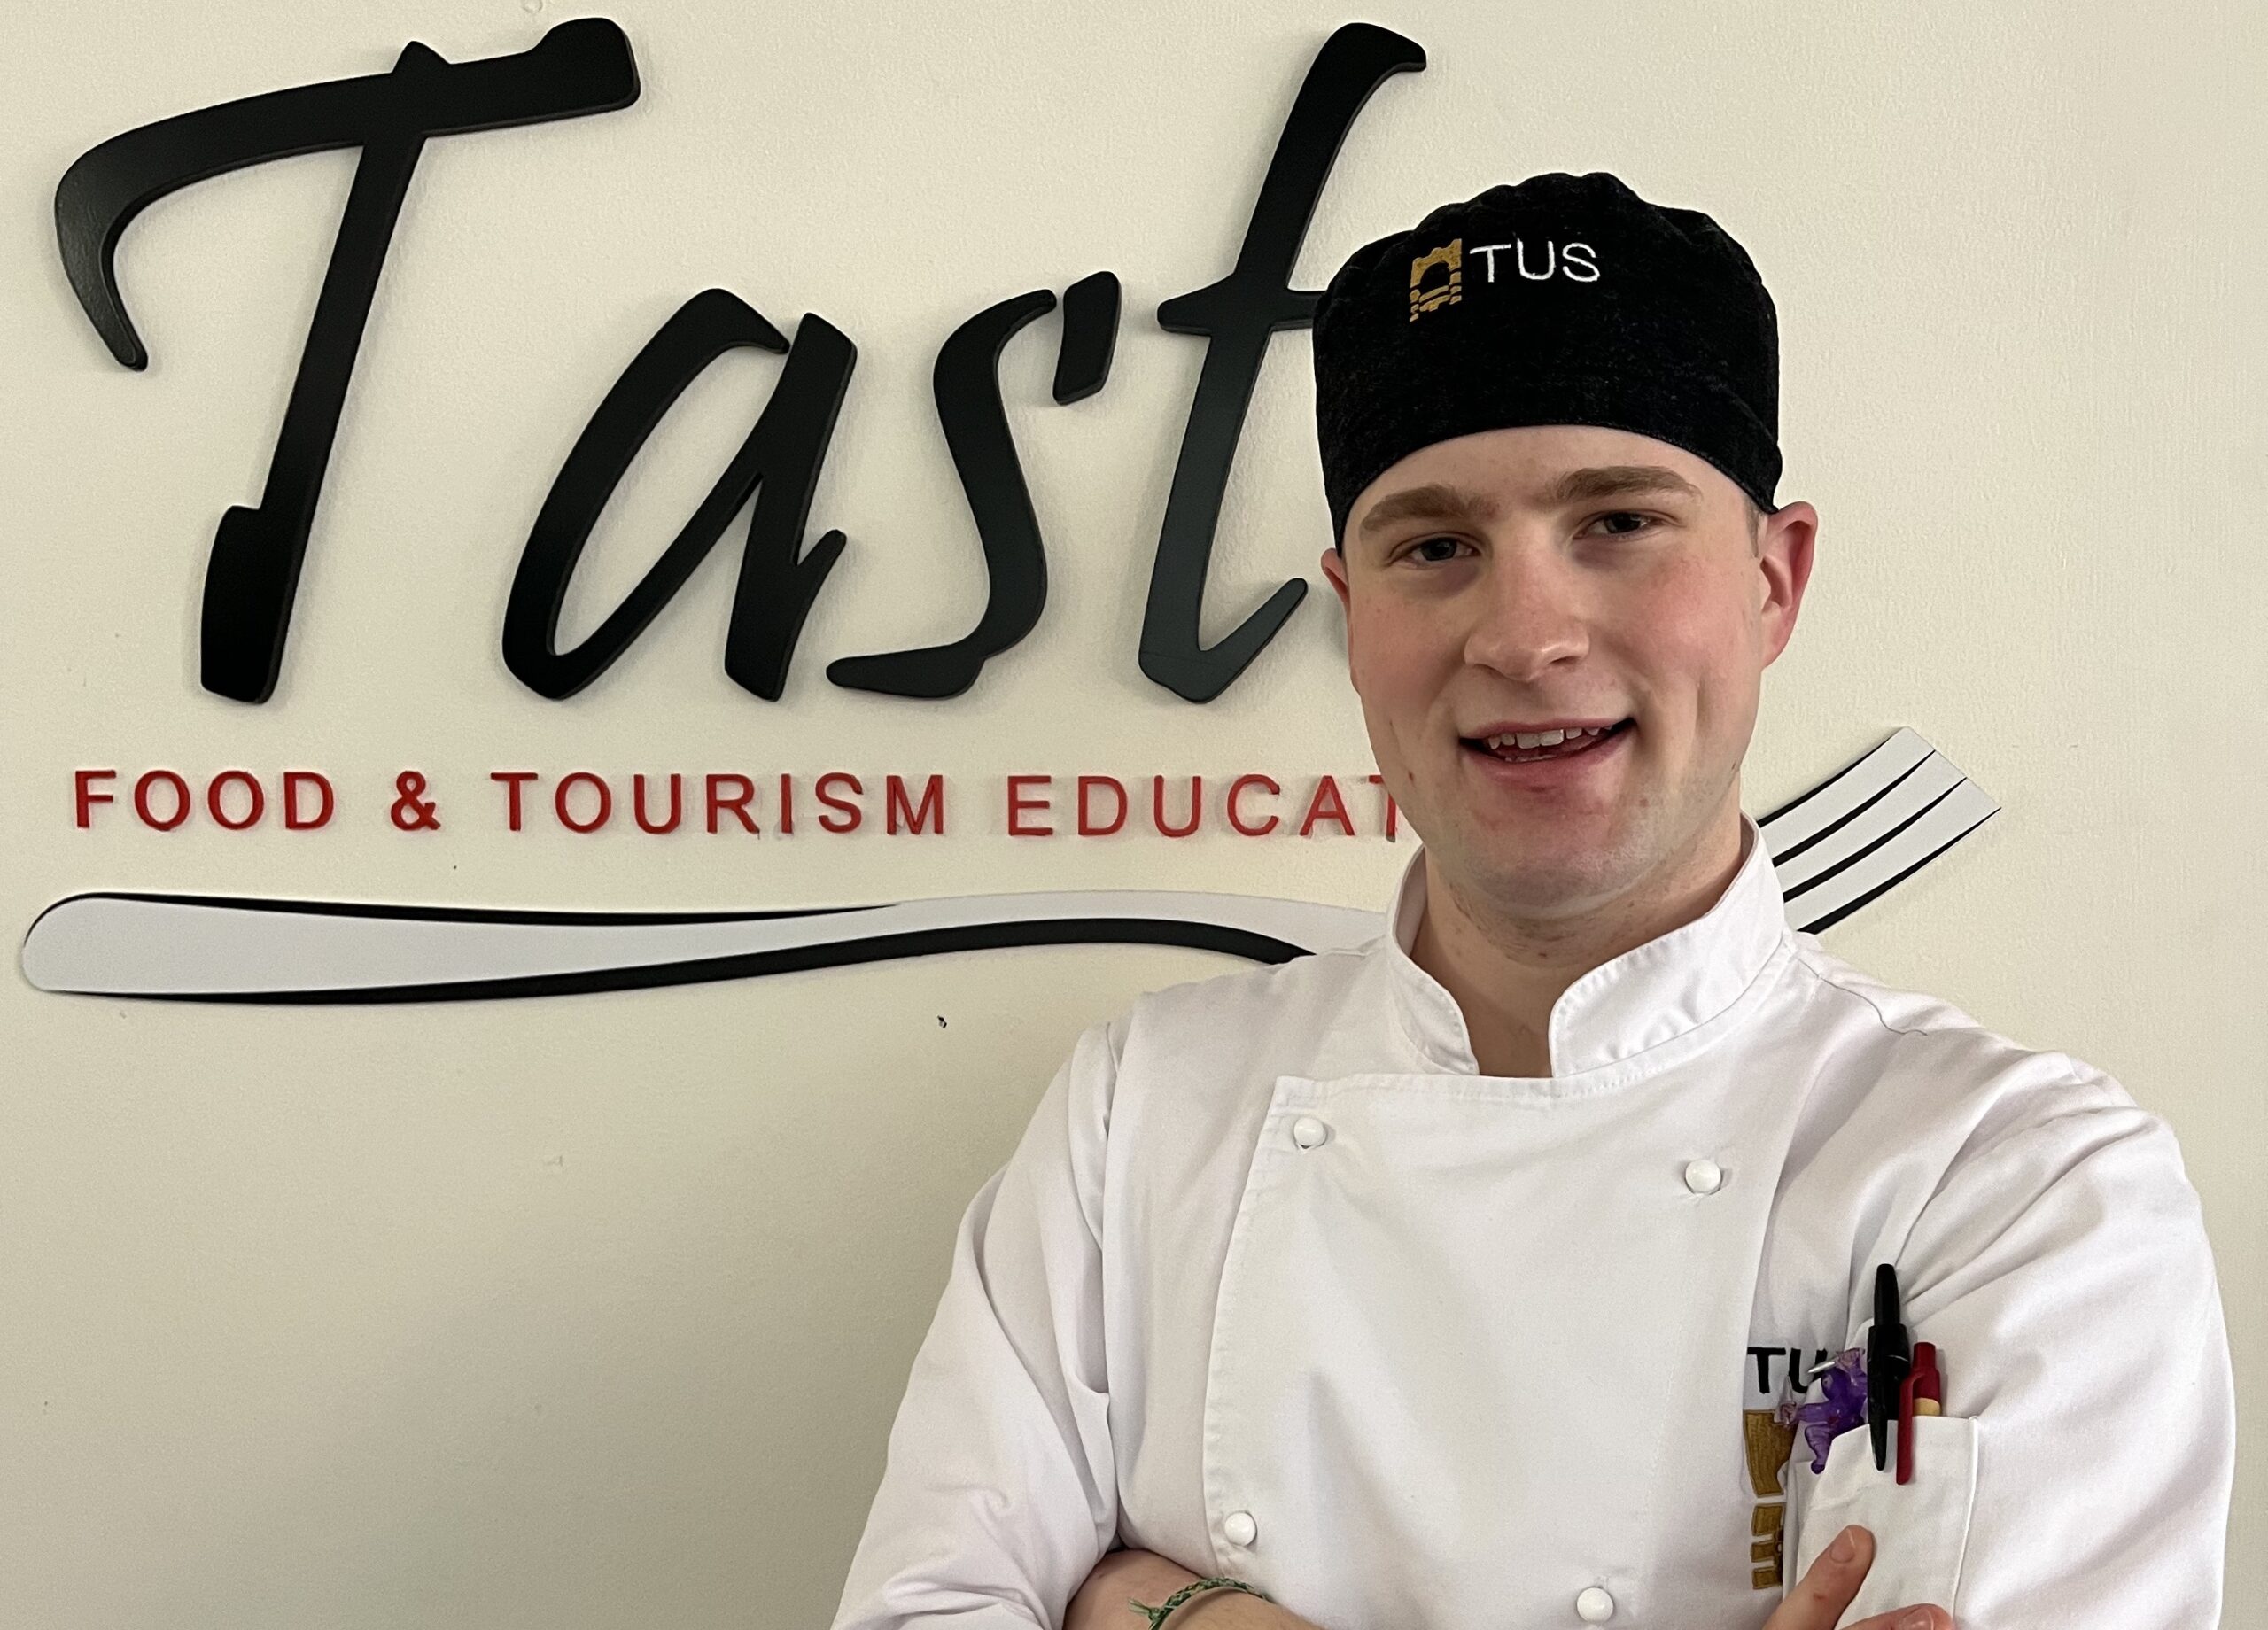 Kieran Bolger pictured above is a second Year BA Culinary Arts student chef from Dooradoyle, Limerick